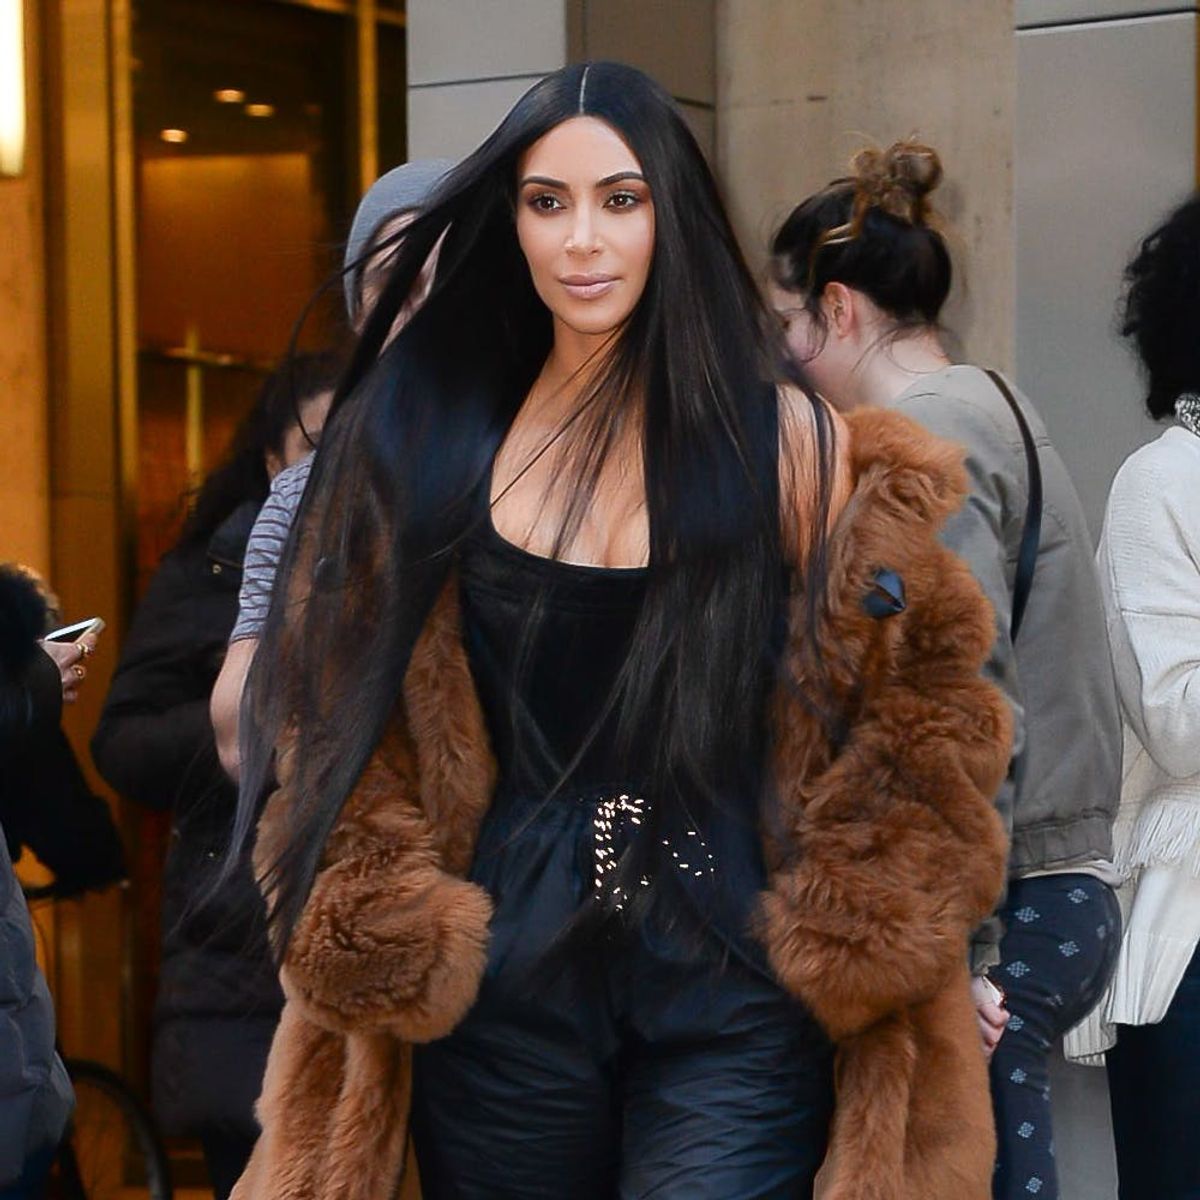 This Is the Unexpected Thing That Helped Kim Kardashian West Cope After Her Paris Robbery